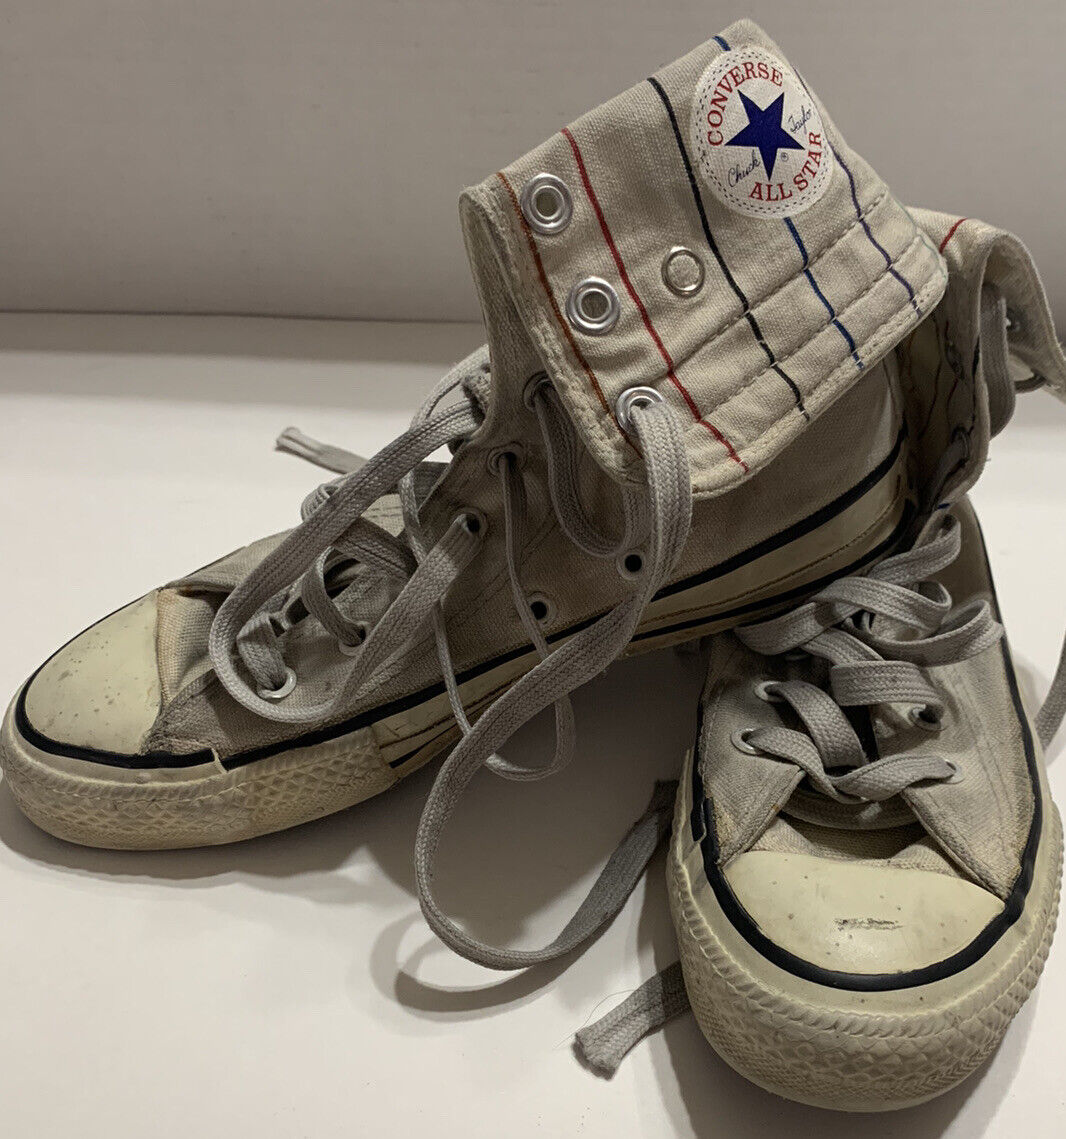 vintage converse chuck taylor made in usa Fold Down Hi Top sz 4 1/2 M & 6 W